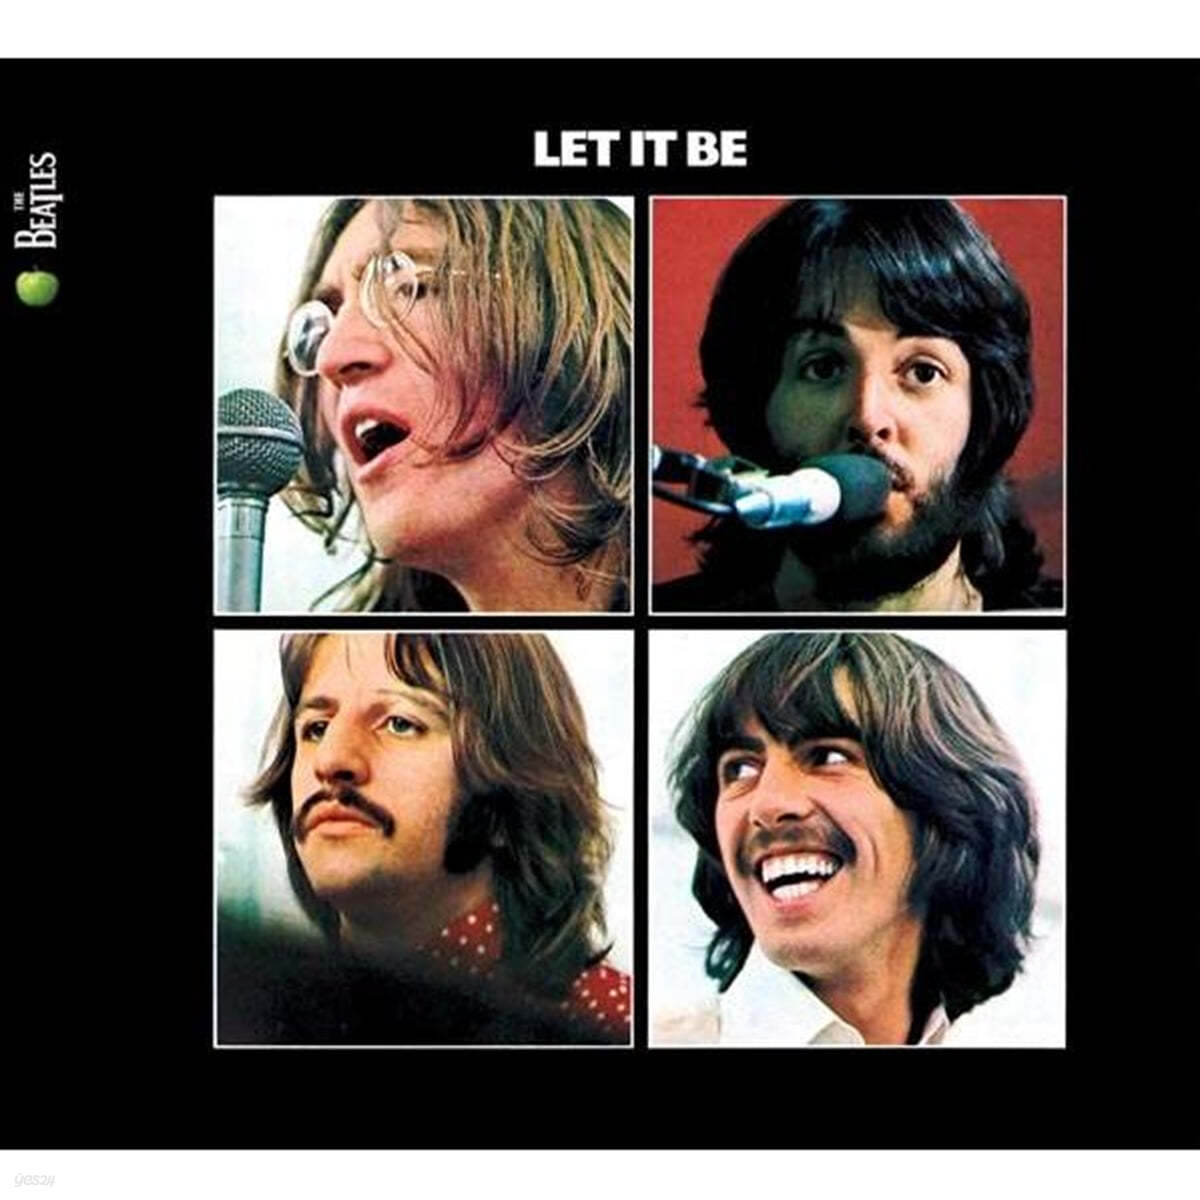 The Beatles (비틀즈) - Let it be [Deluxel Edition] 